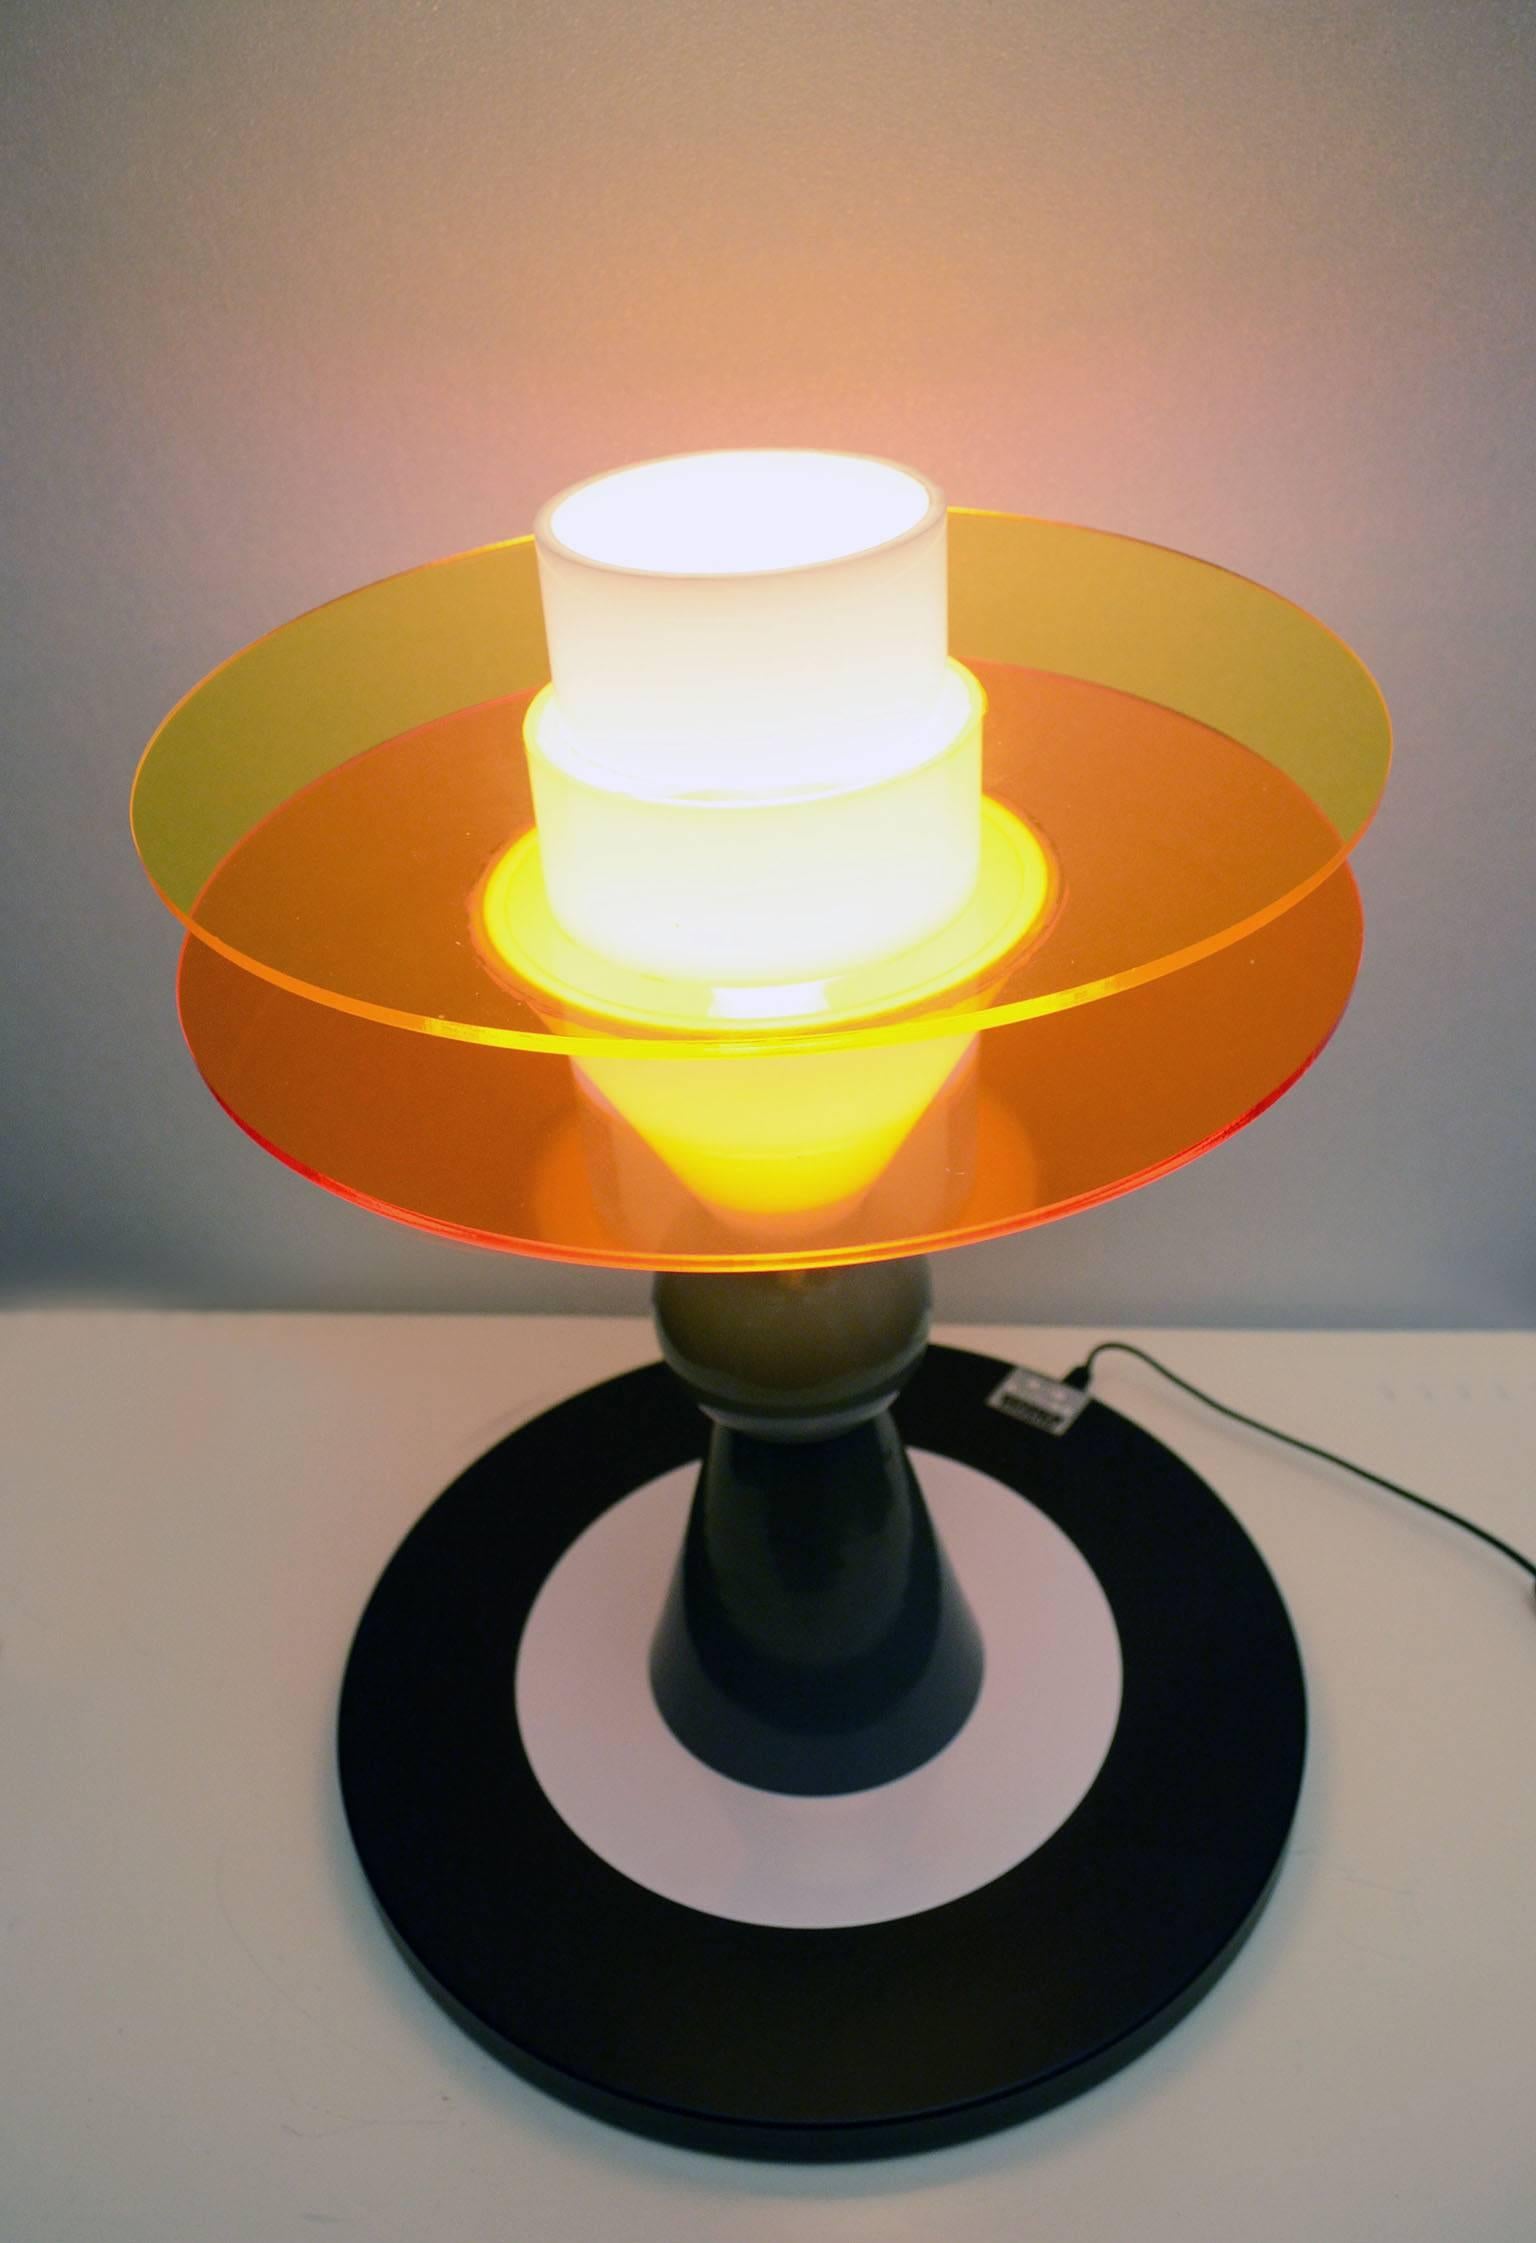 Ettore Sottsass for Memphis 'Bay' Table Lamp, 1983 In Excellent Condition For Sale In Parma, IT